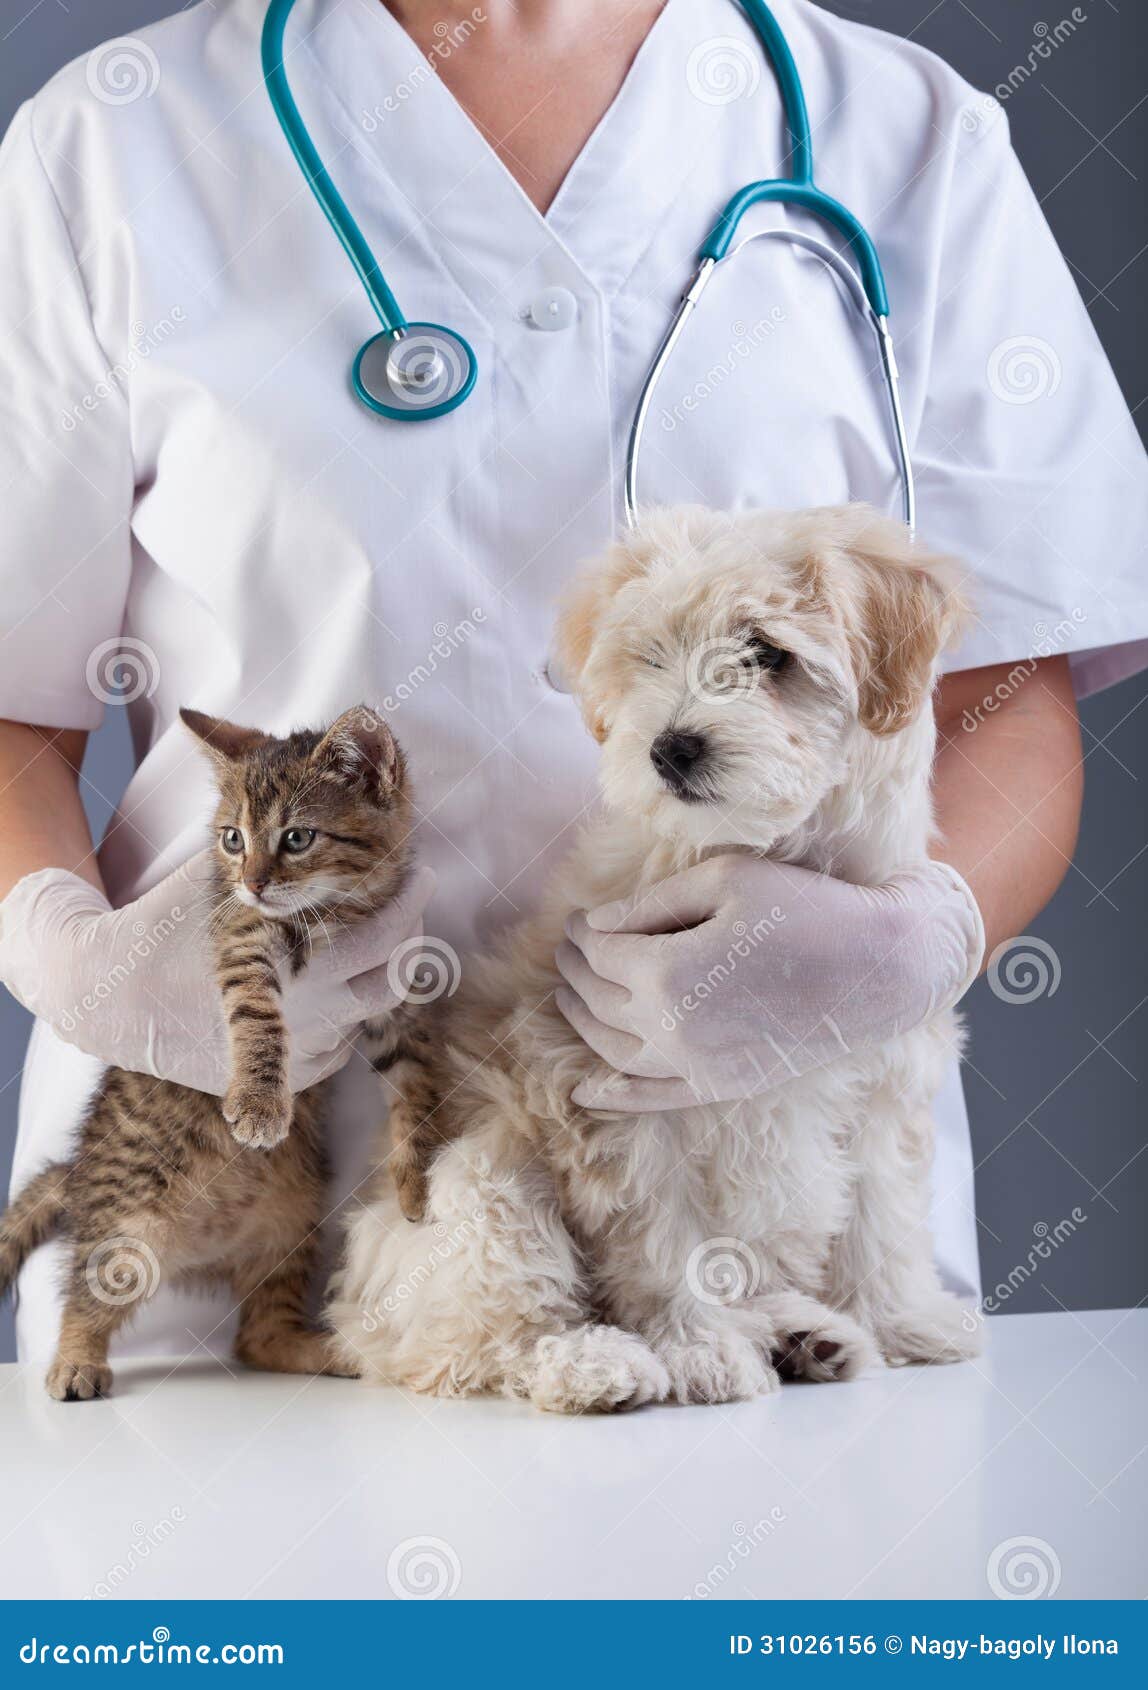 Animal Doctor Closeup with Pets Stock Photo - Image of examination, kitten:  31026156